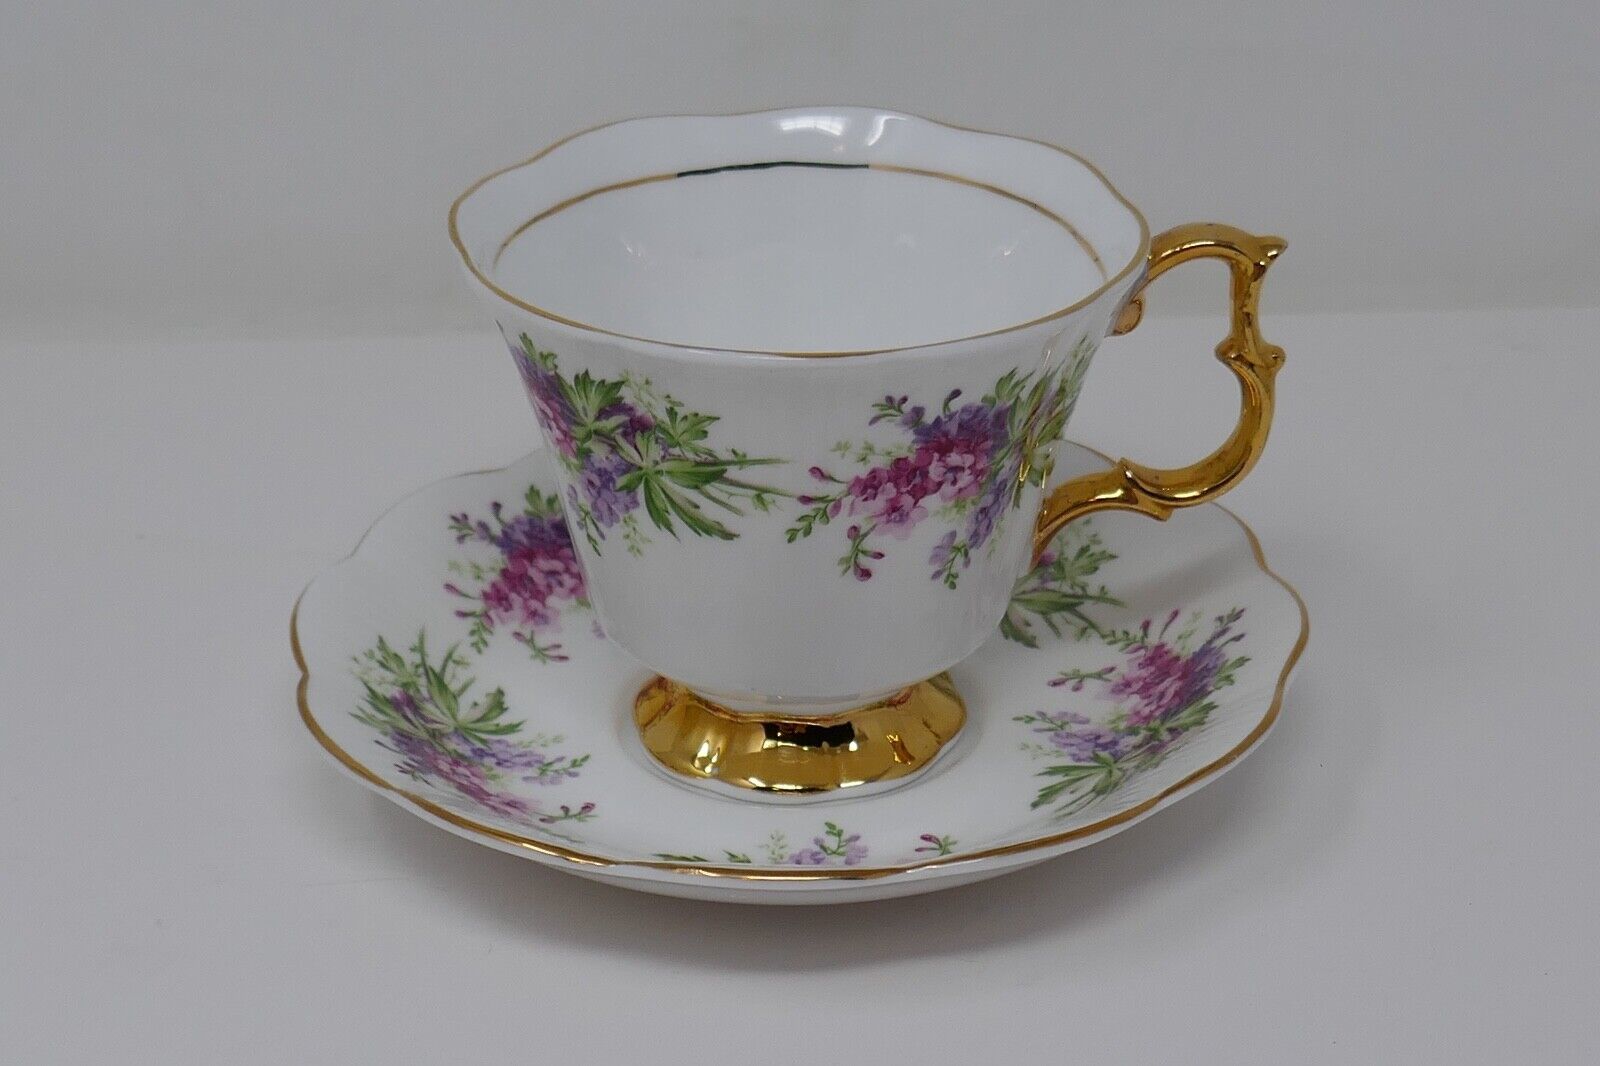 H M Sutherland Tea Cup and Saucer, Bright Pink Gold Leaves Teacup and  Saucer, Fine Bone China 